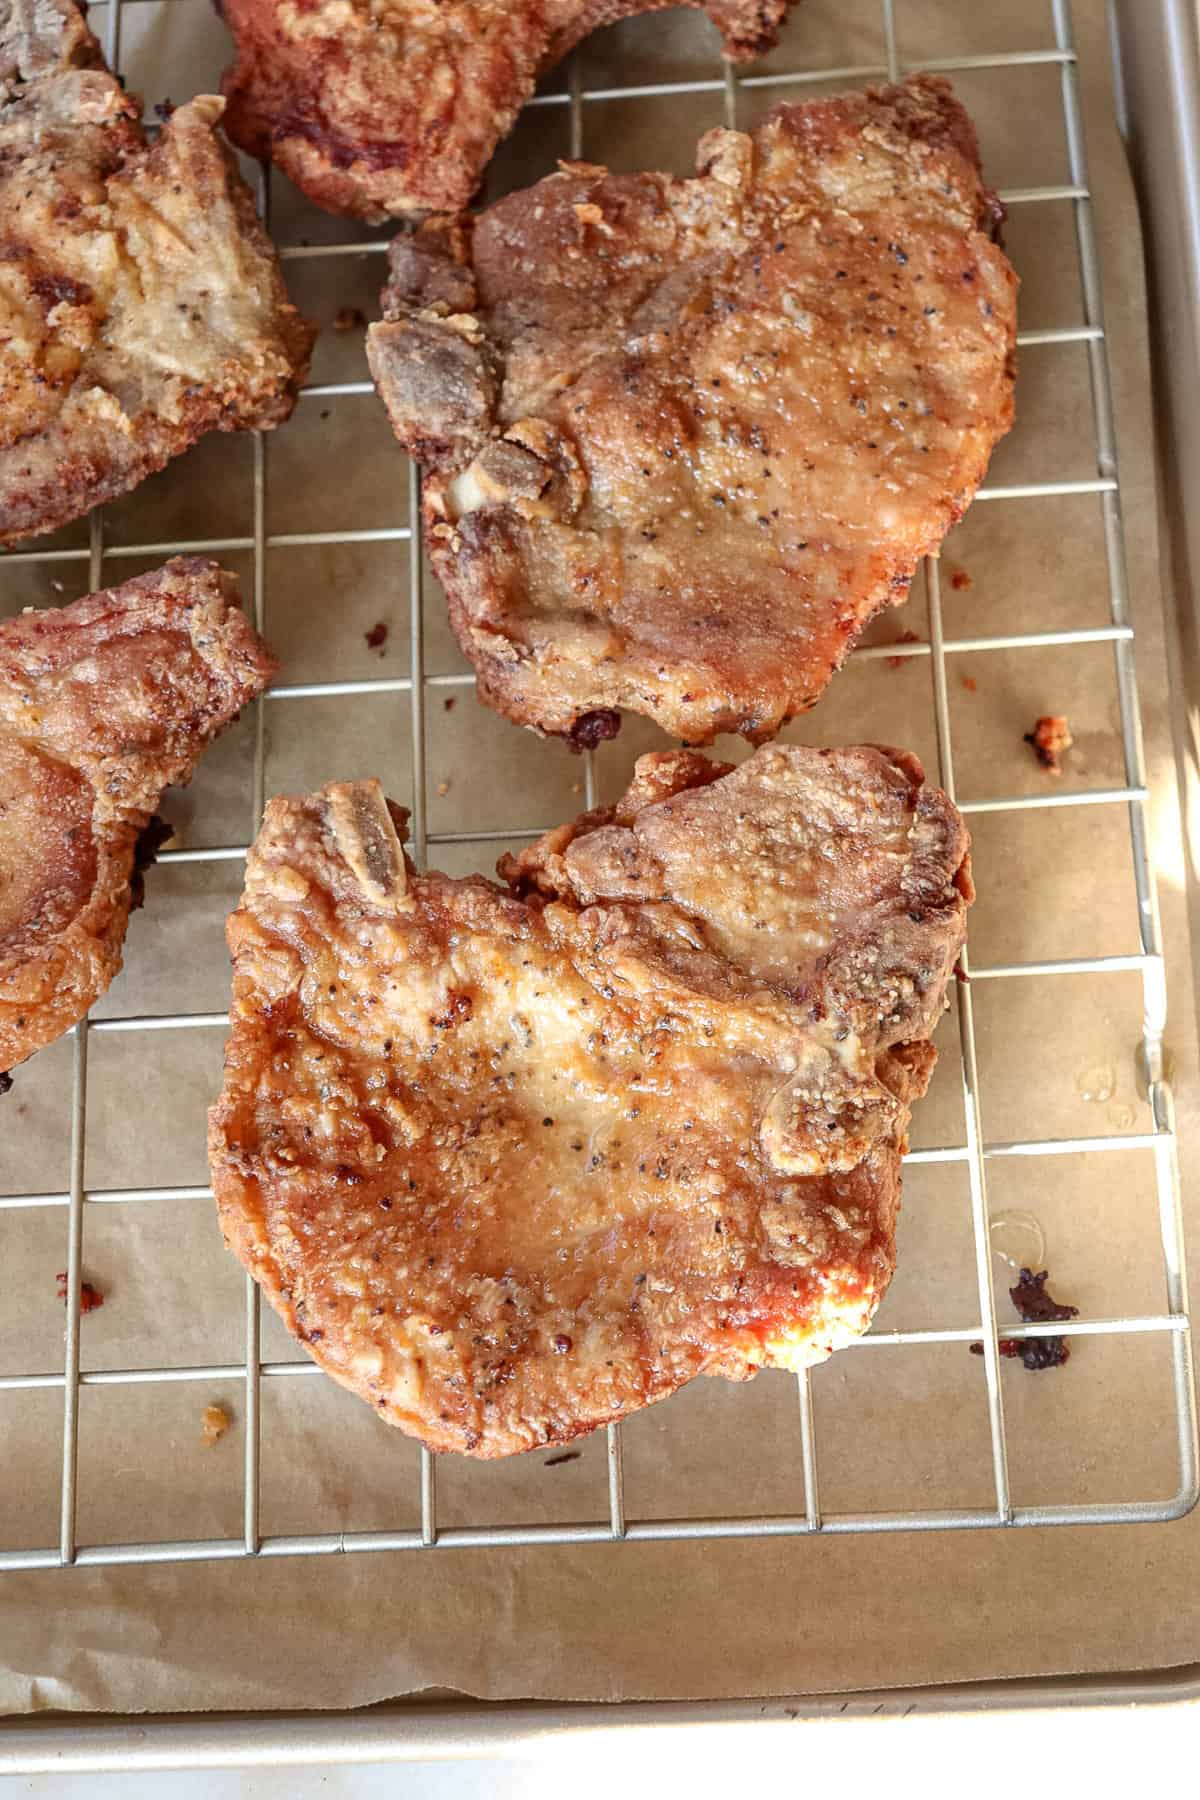 pork chops are resting on a cooling rack that is sitting over a piece of parchment paper so that all of the excess oil from frying can drain